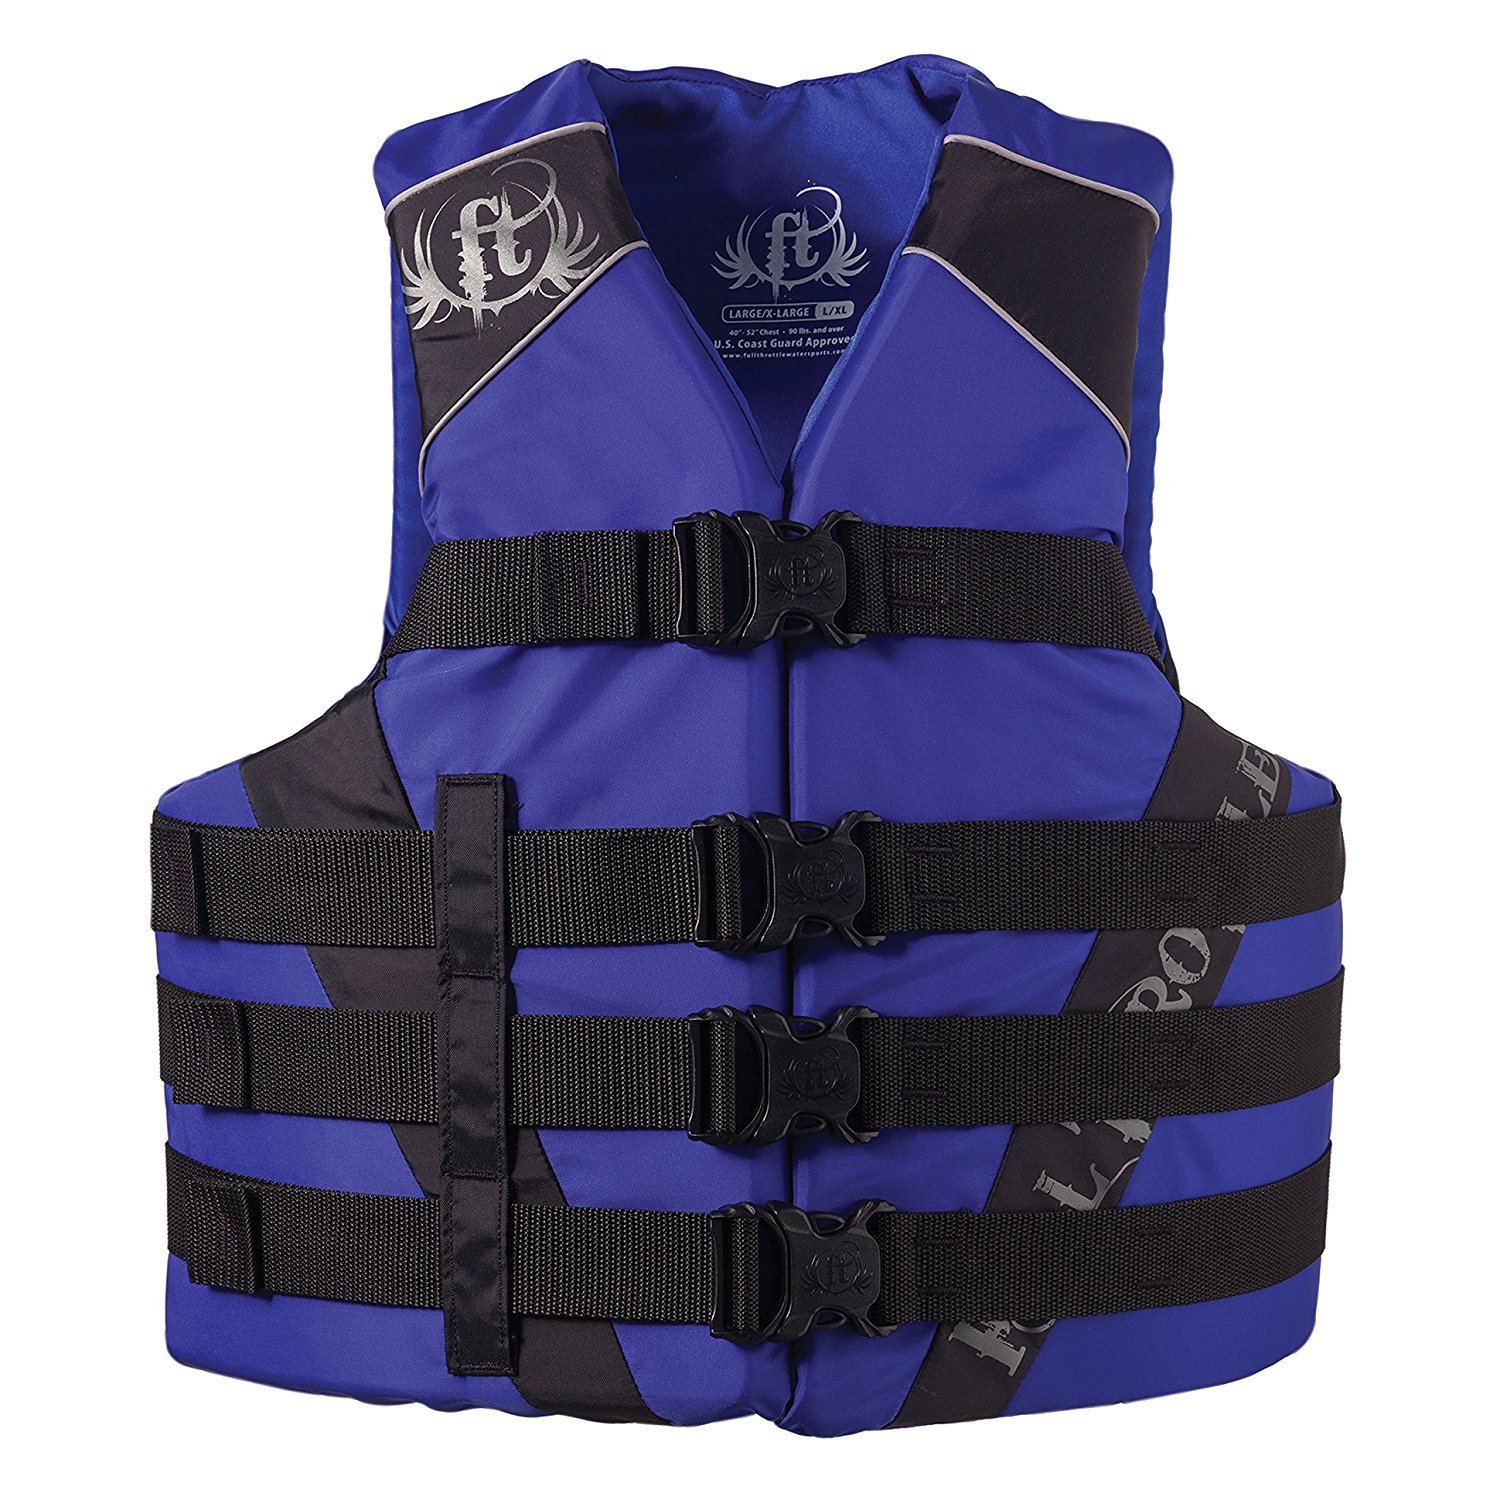 Big And Tall Life Jackets: Best Fitting Life Vests | WaterDudes